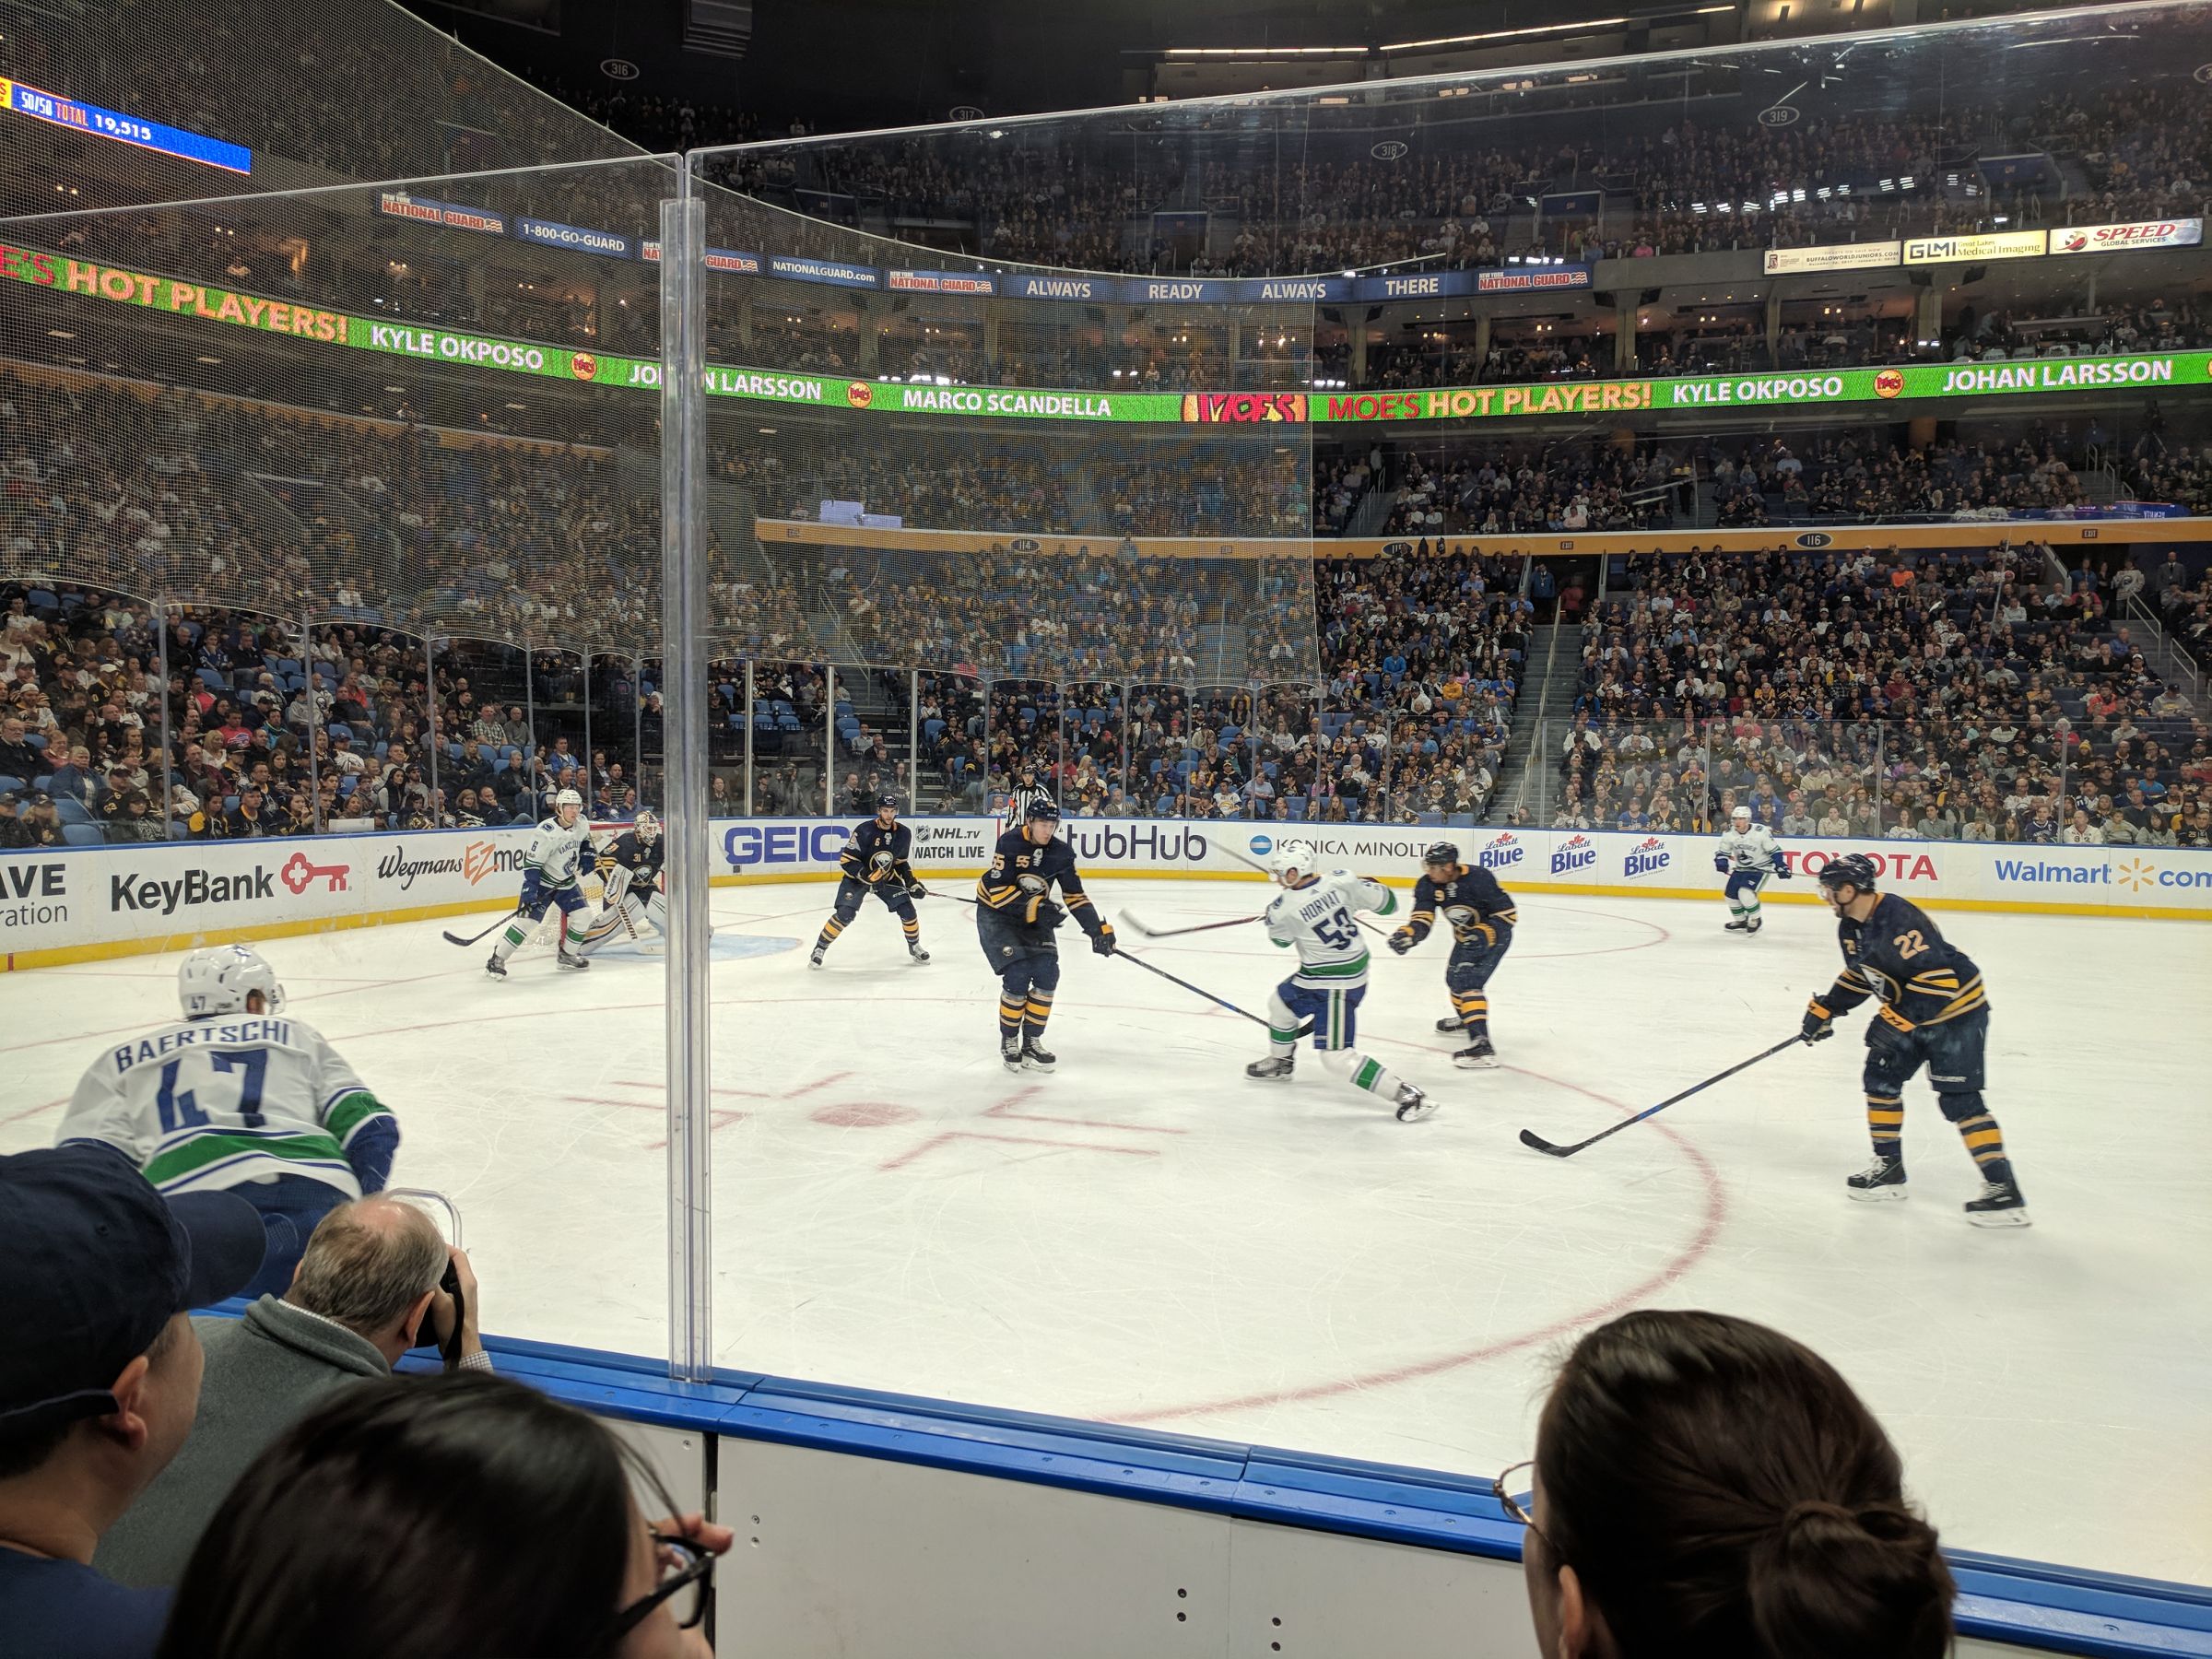 section 106, row 3 seat view  for hockey - keybank center